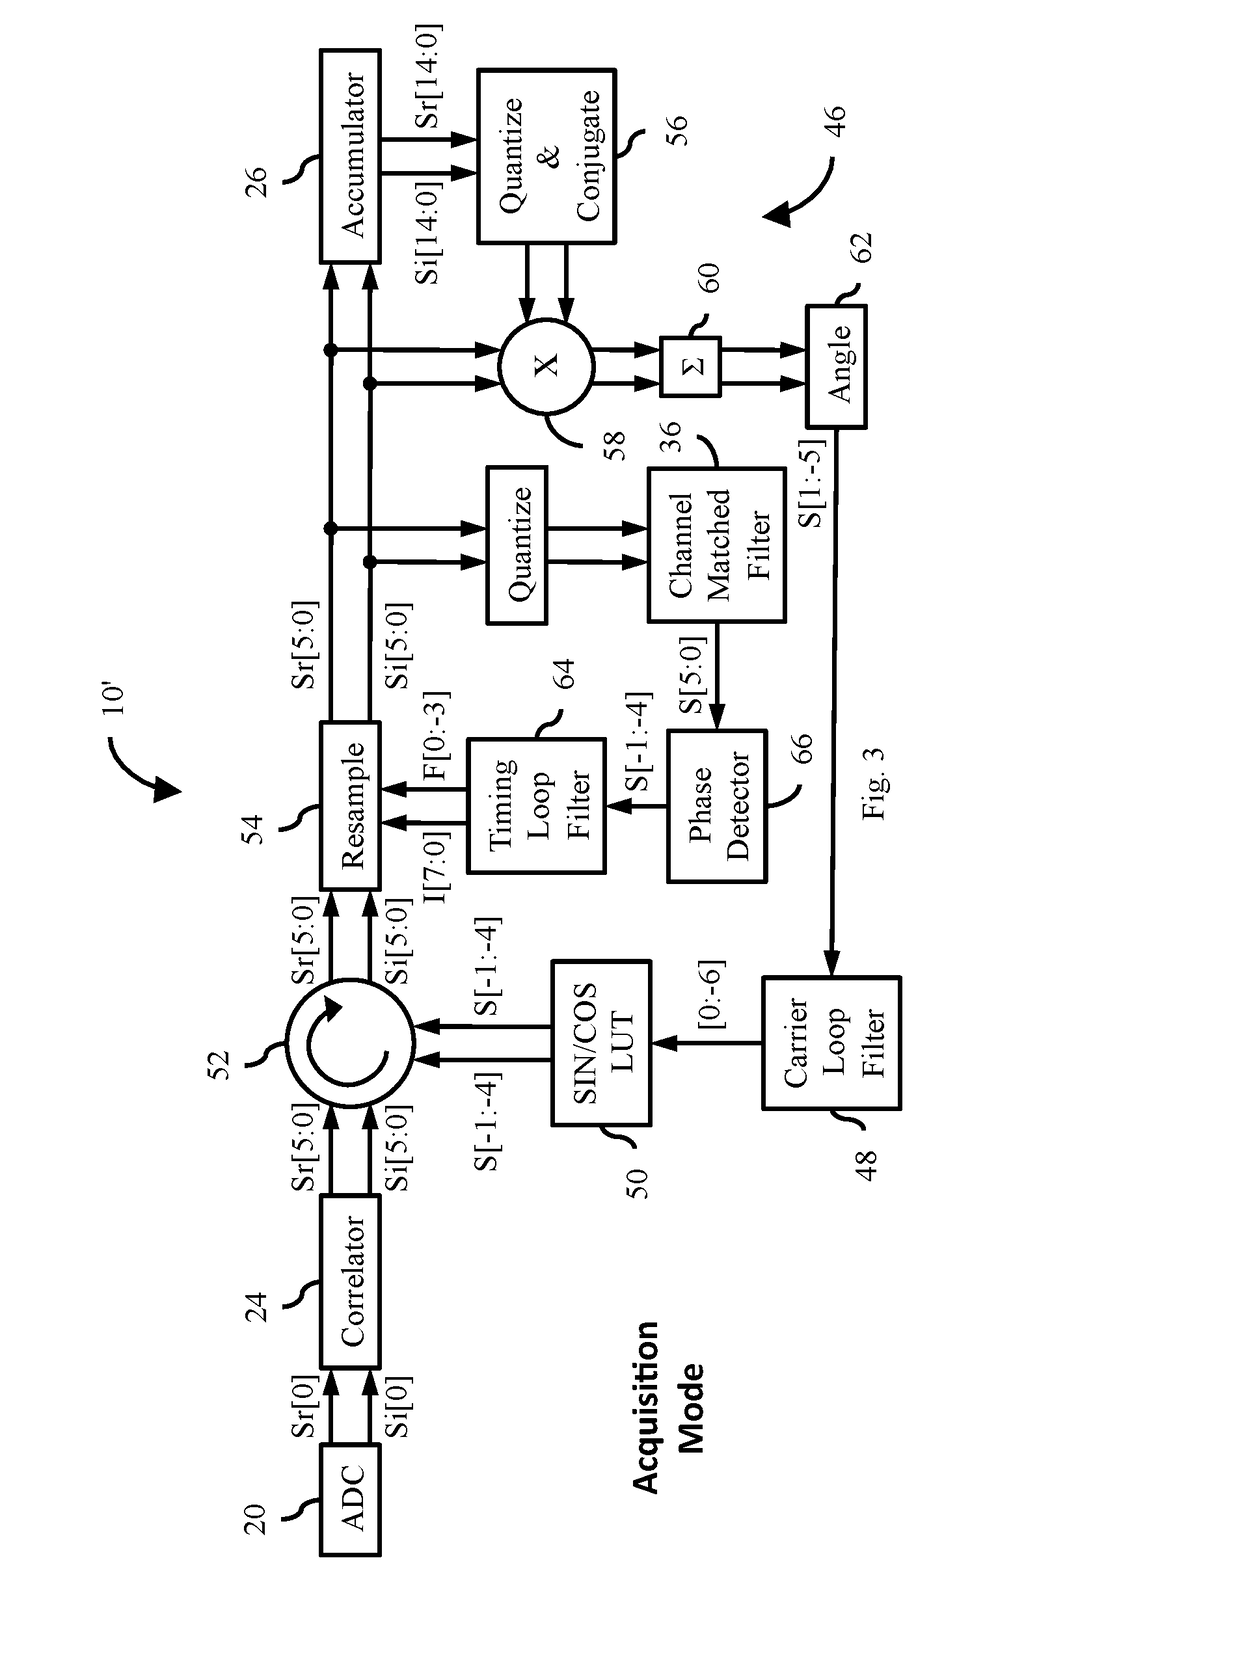 Measuring Angle of Incidence in an Ultrawideband Communication System